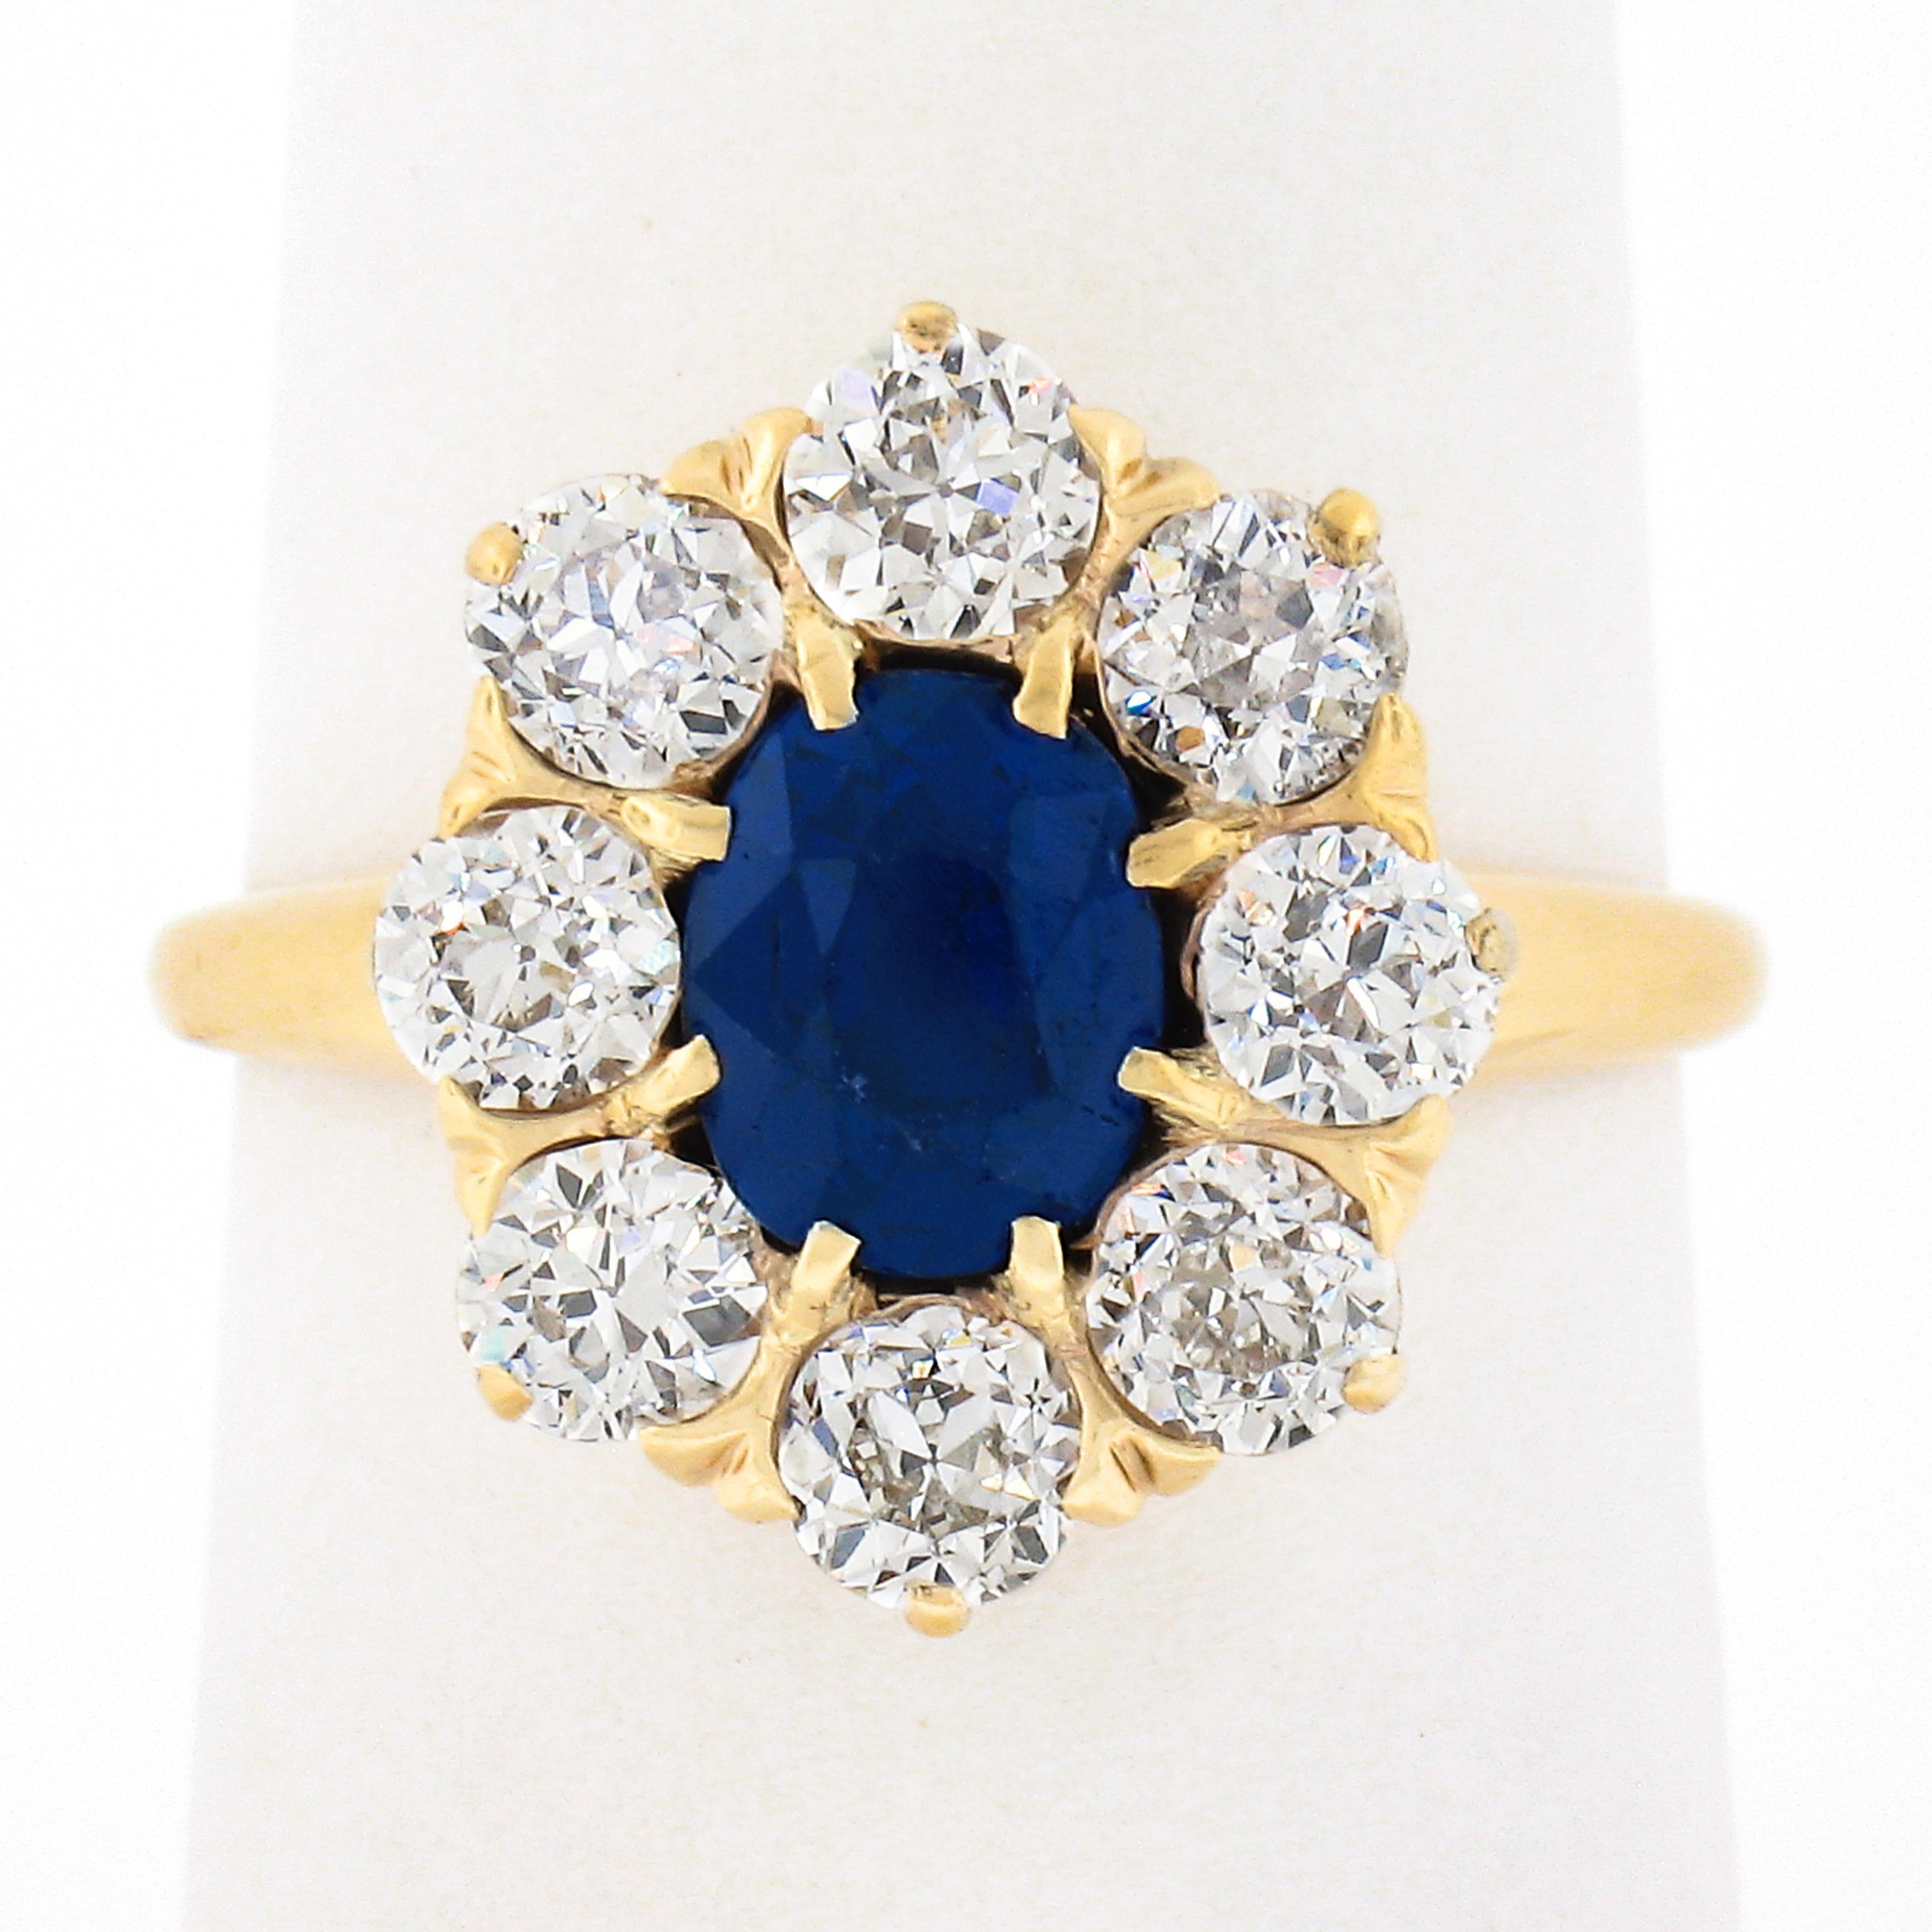 You are looking at a truly breathtaking antique sapphire and diamond engagement ring that was crafted during the Victorian period from solid 14k yellow gold. The ring features a gorgeous, old oval cut, Burma sapphire stone that is elegantly